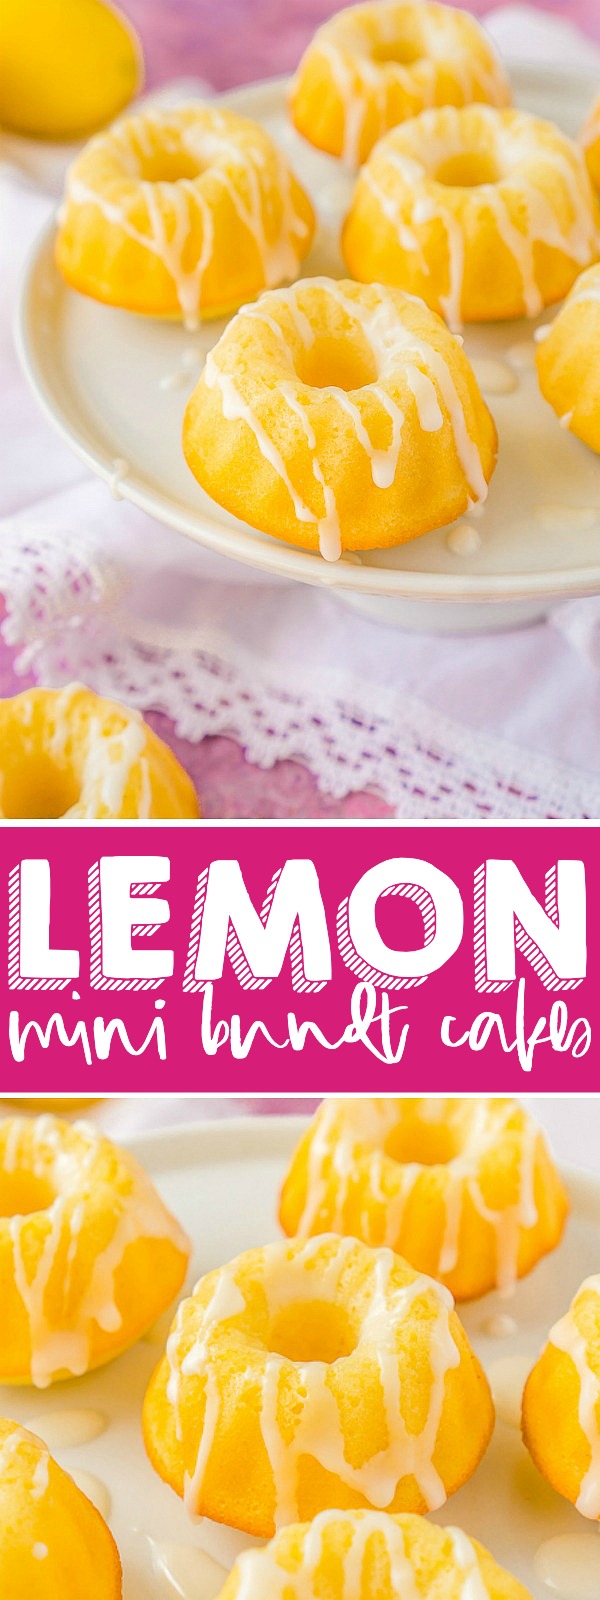 Mini Lemon Bundt Cakes are the perfect dessert recipe for spring and summer! These tiny and tangy lemon chiffon cakes are the perfect blend of sweet and tart, making them great for Easter, Mother's Day brunch, summer bbqs, bridal showers and baby showers! | THE LOVE NERDS